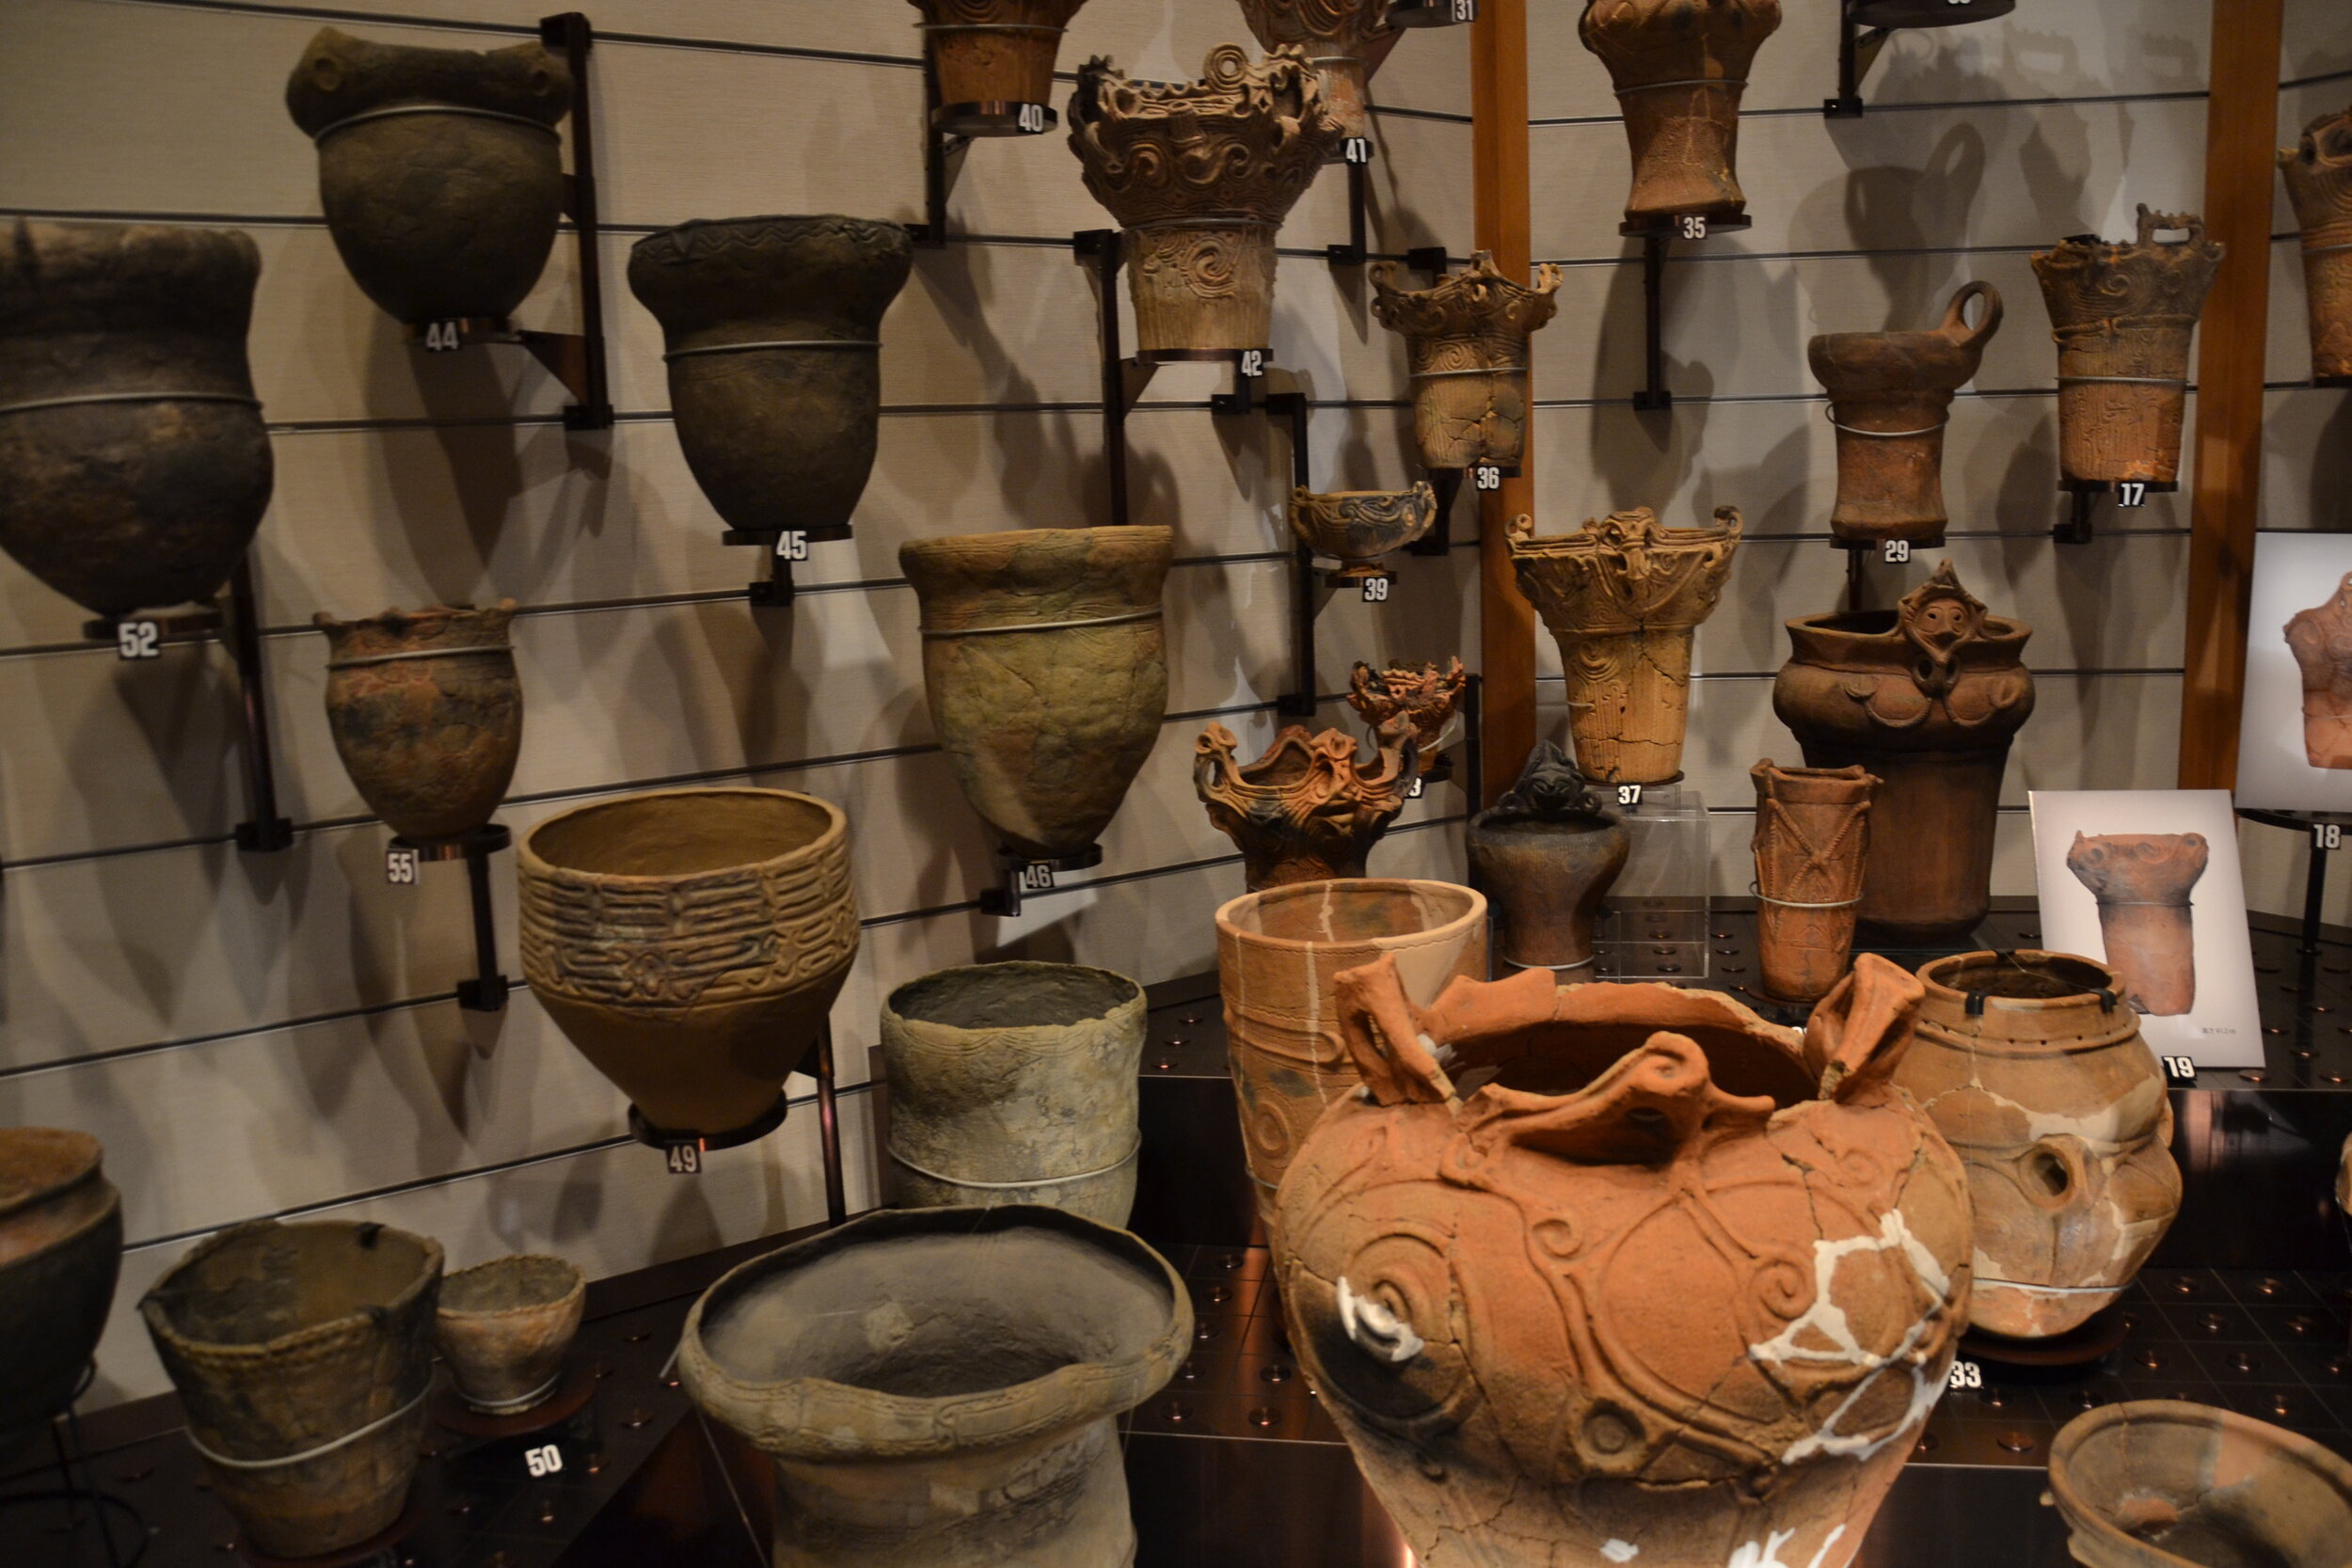  Jomon pottery. Photo by author, taken at the  National Museum of Japanese History  in Sakura, Japan 